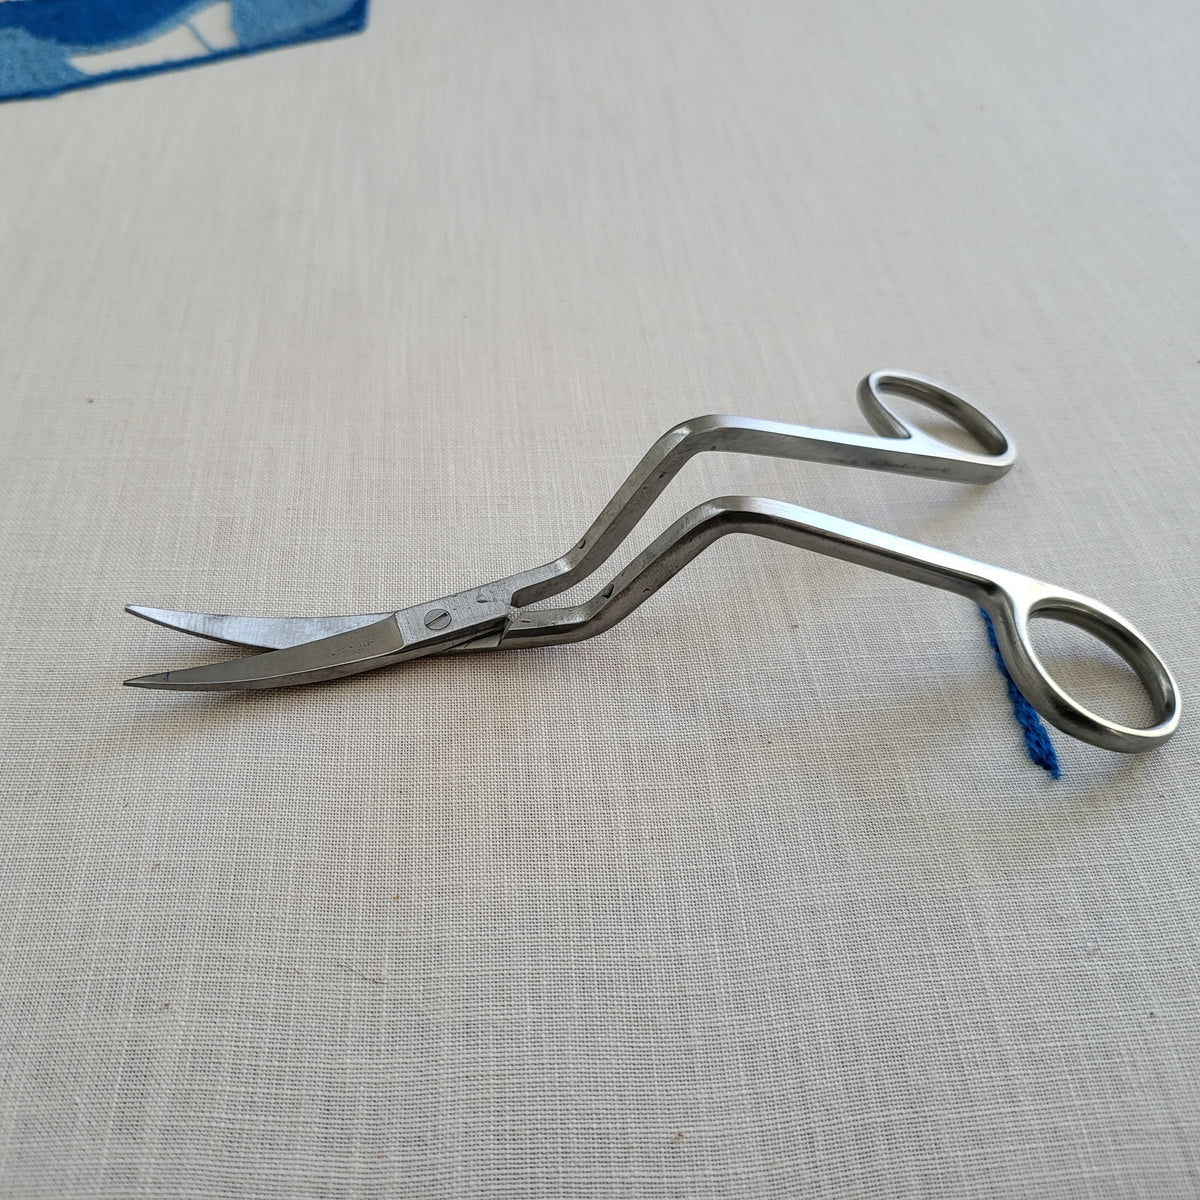 Klasse Machine Embroidery Bent Tip Scissor - Great for Punch Needle &amp; carving